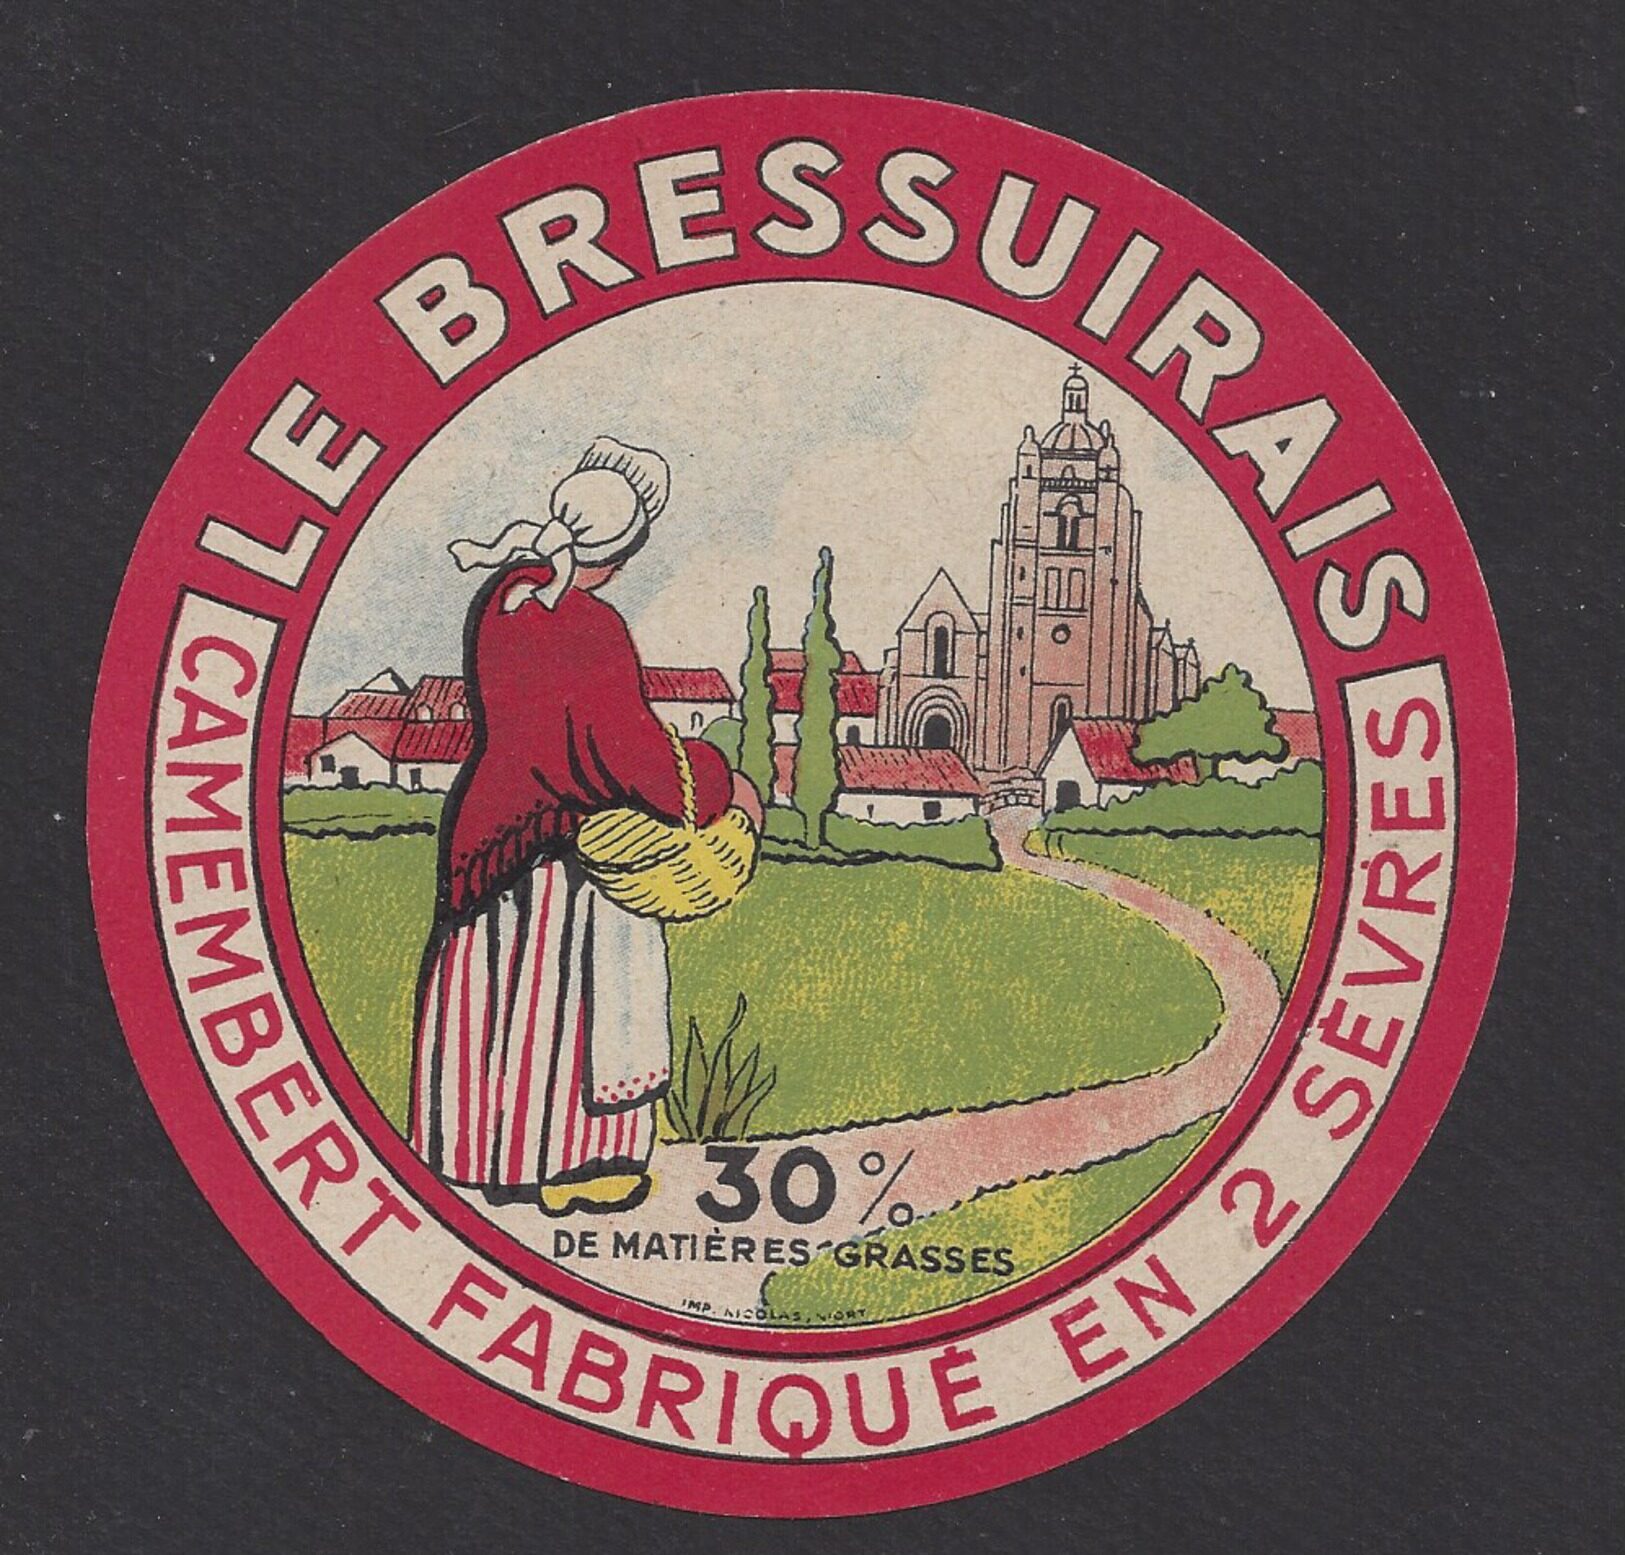 You are currently viewing « Le Bressuirais », un fromage inconnu ?